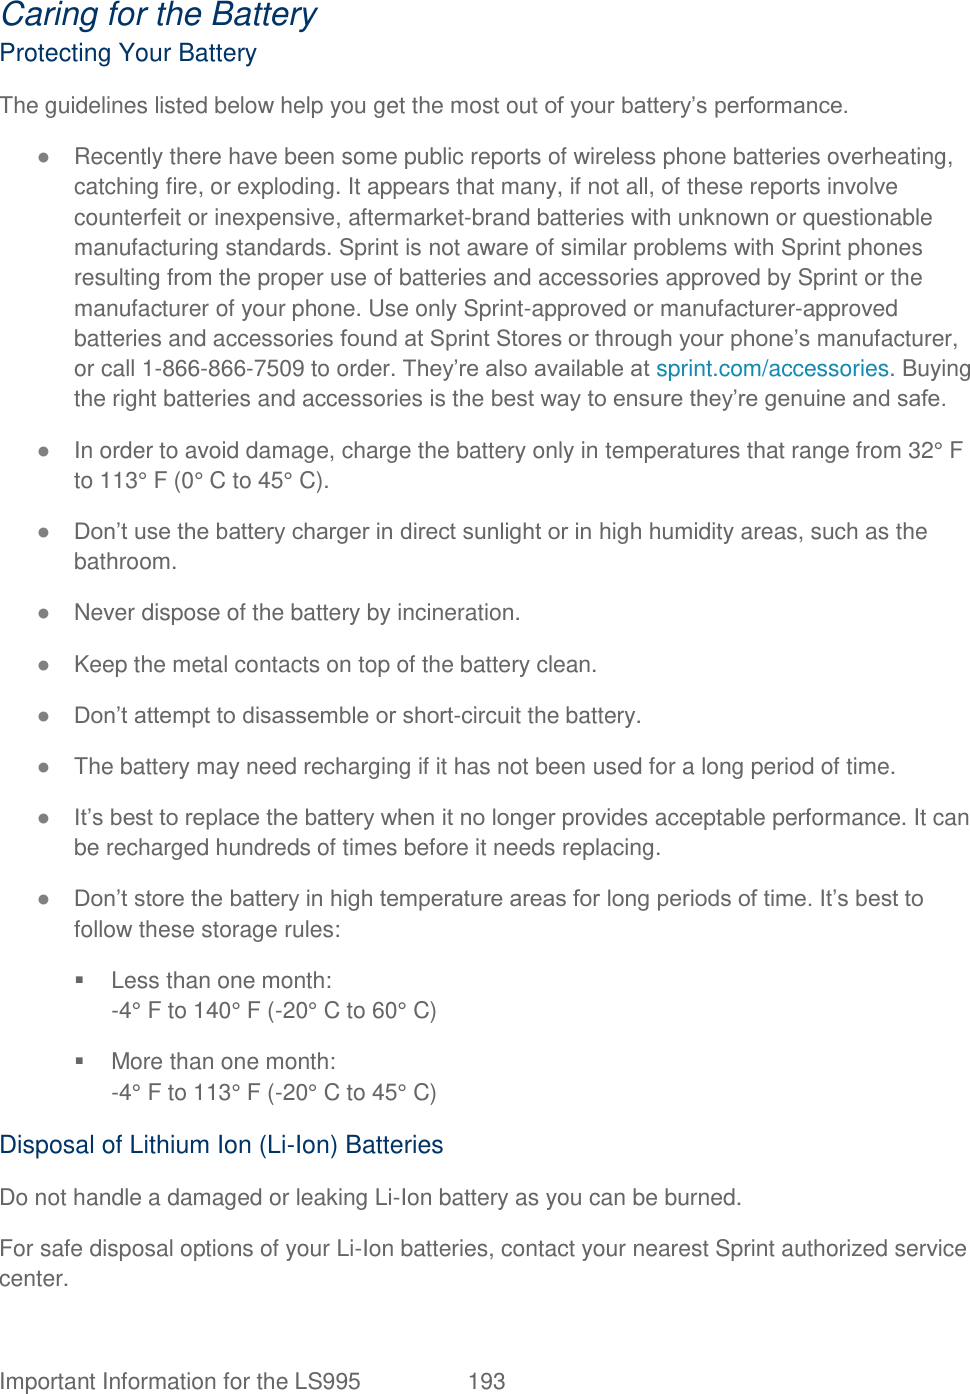  Important Information for the LS995  193   Caring for the Battery Protecting Your Battery The guidelines listed below help you get the most out of your battery‘s performance. ● Recently there have been some public reports of wireless phone batteries overheating, catching fire, or exploding. It appears that many, if not all, of these reports involve counterfeit or inexpensive, aftermarket-brand batteries with unknown or questionable manufacturing standards. Sprint is not aware of similar problems with Sprint phones resulting from the proper use of batteries and accessories approved by Sprint or the manufacturer of your phone. Use only Sprint-approved or manufacturer-approved batteries and accessories found at Sprint Stores or through your phone‘s manufacturer, or call 1-866-866-7509 to order. They‘re also available at sprint.com/accessories. Buying the right batteries and accessories is the best way to ensure they‘re genuine and safe. ● In order to avoid damage, charge the battery only in temperatures that range from 32° F to 113° F (0° C to 45° C). ● Don‘t use the battery charger in direct sunlight or in high humidity areas, such as the bathroom. ● Never dispose of the battery by incineration. ● Keep the metal contacts on top of the battery clean. ● Don‘t attempt to disassemble or short-circuit the battery. ● The battery may need recharging if it has not been used for a long period of time. ● It‘s best to replace the battery when it no longer provides acceptable performance. It can be recharged hundreds of times before it needs replacing. ● Don‘t store the battery in high temperature areas for long periods of time. It‘s best to follow these storage rules:   Less than one month: -4° F to 140° F (-20° C to 60° C)   More than one month: -4° F to 113° F (-20° C to 45° C) Disposal of Lithium Ion (Li-Ion) Batteries Do not handle a damaged or leaking Li-Ion battery as you can be burned. For safe disposal options of your Li-Ion batteries, contact your nearest Sprint authorized service center. 